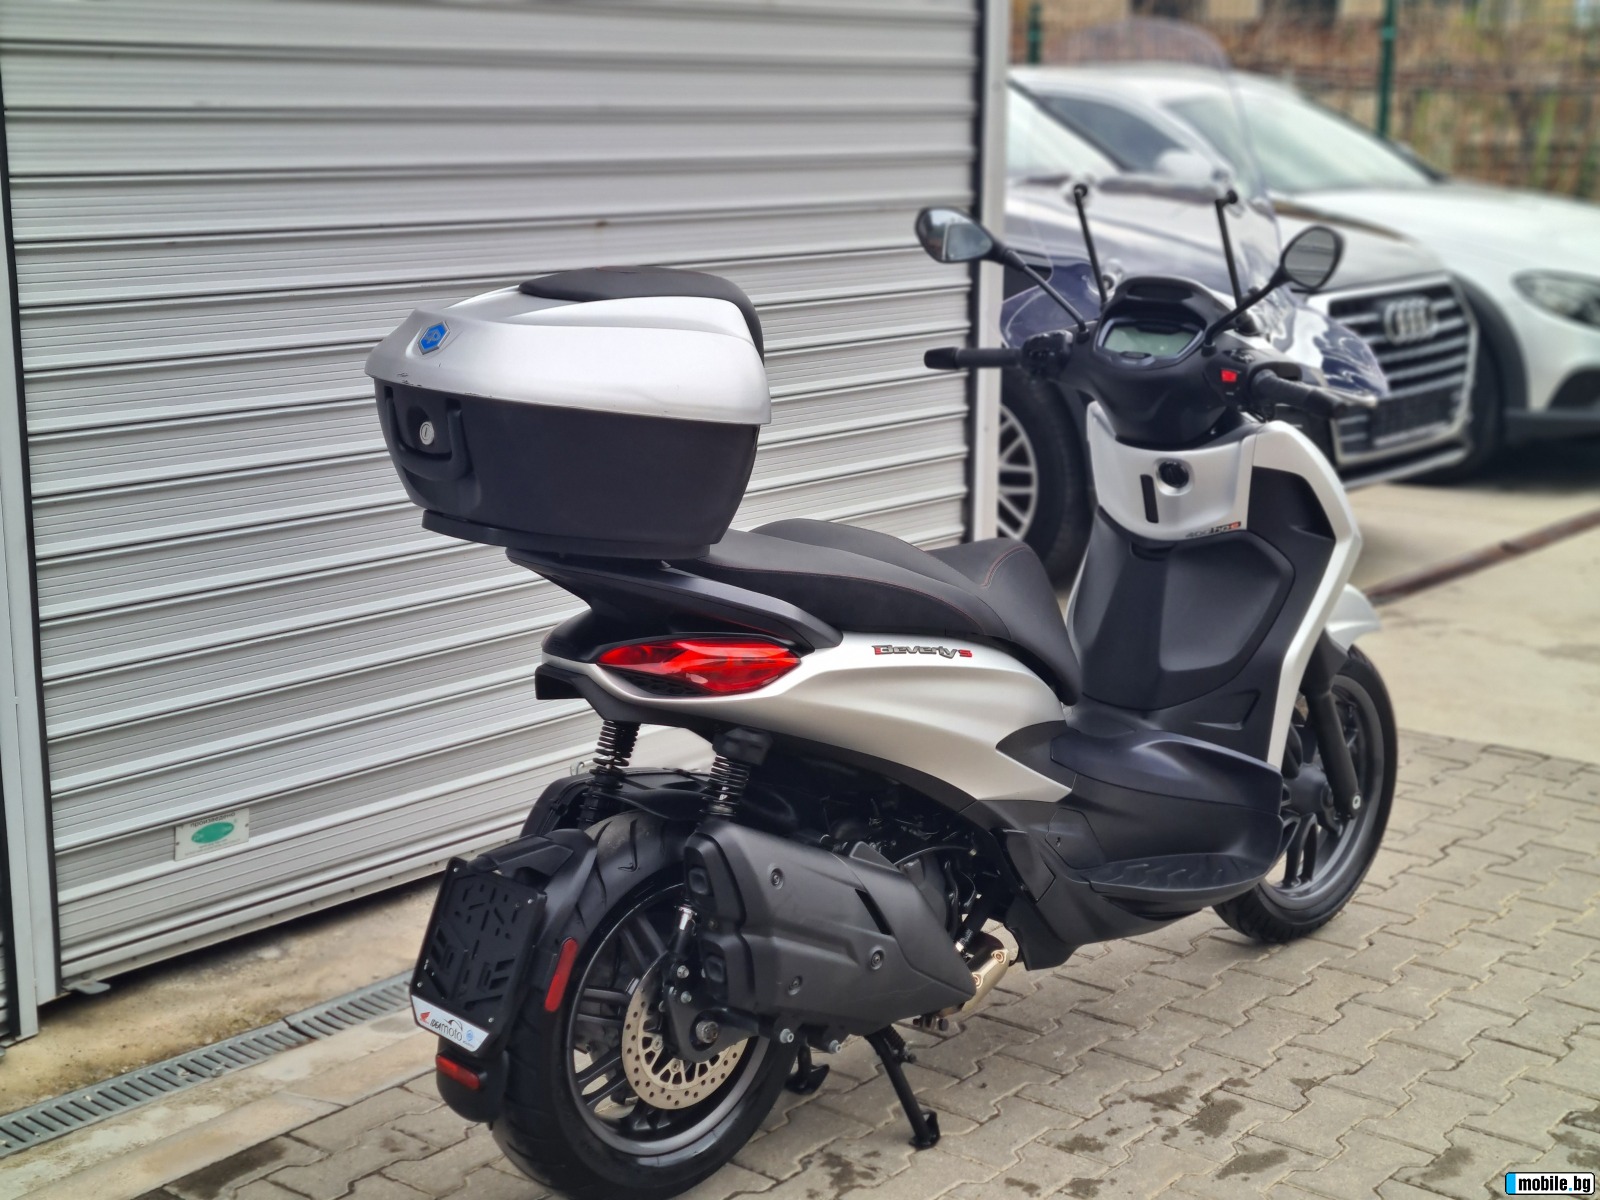 Piaggio Beverly 400ie S ABS/ASR | Mobile.bg   3